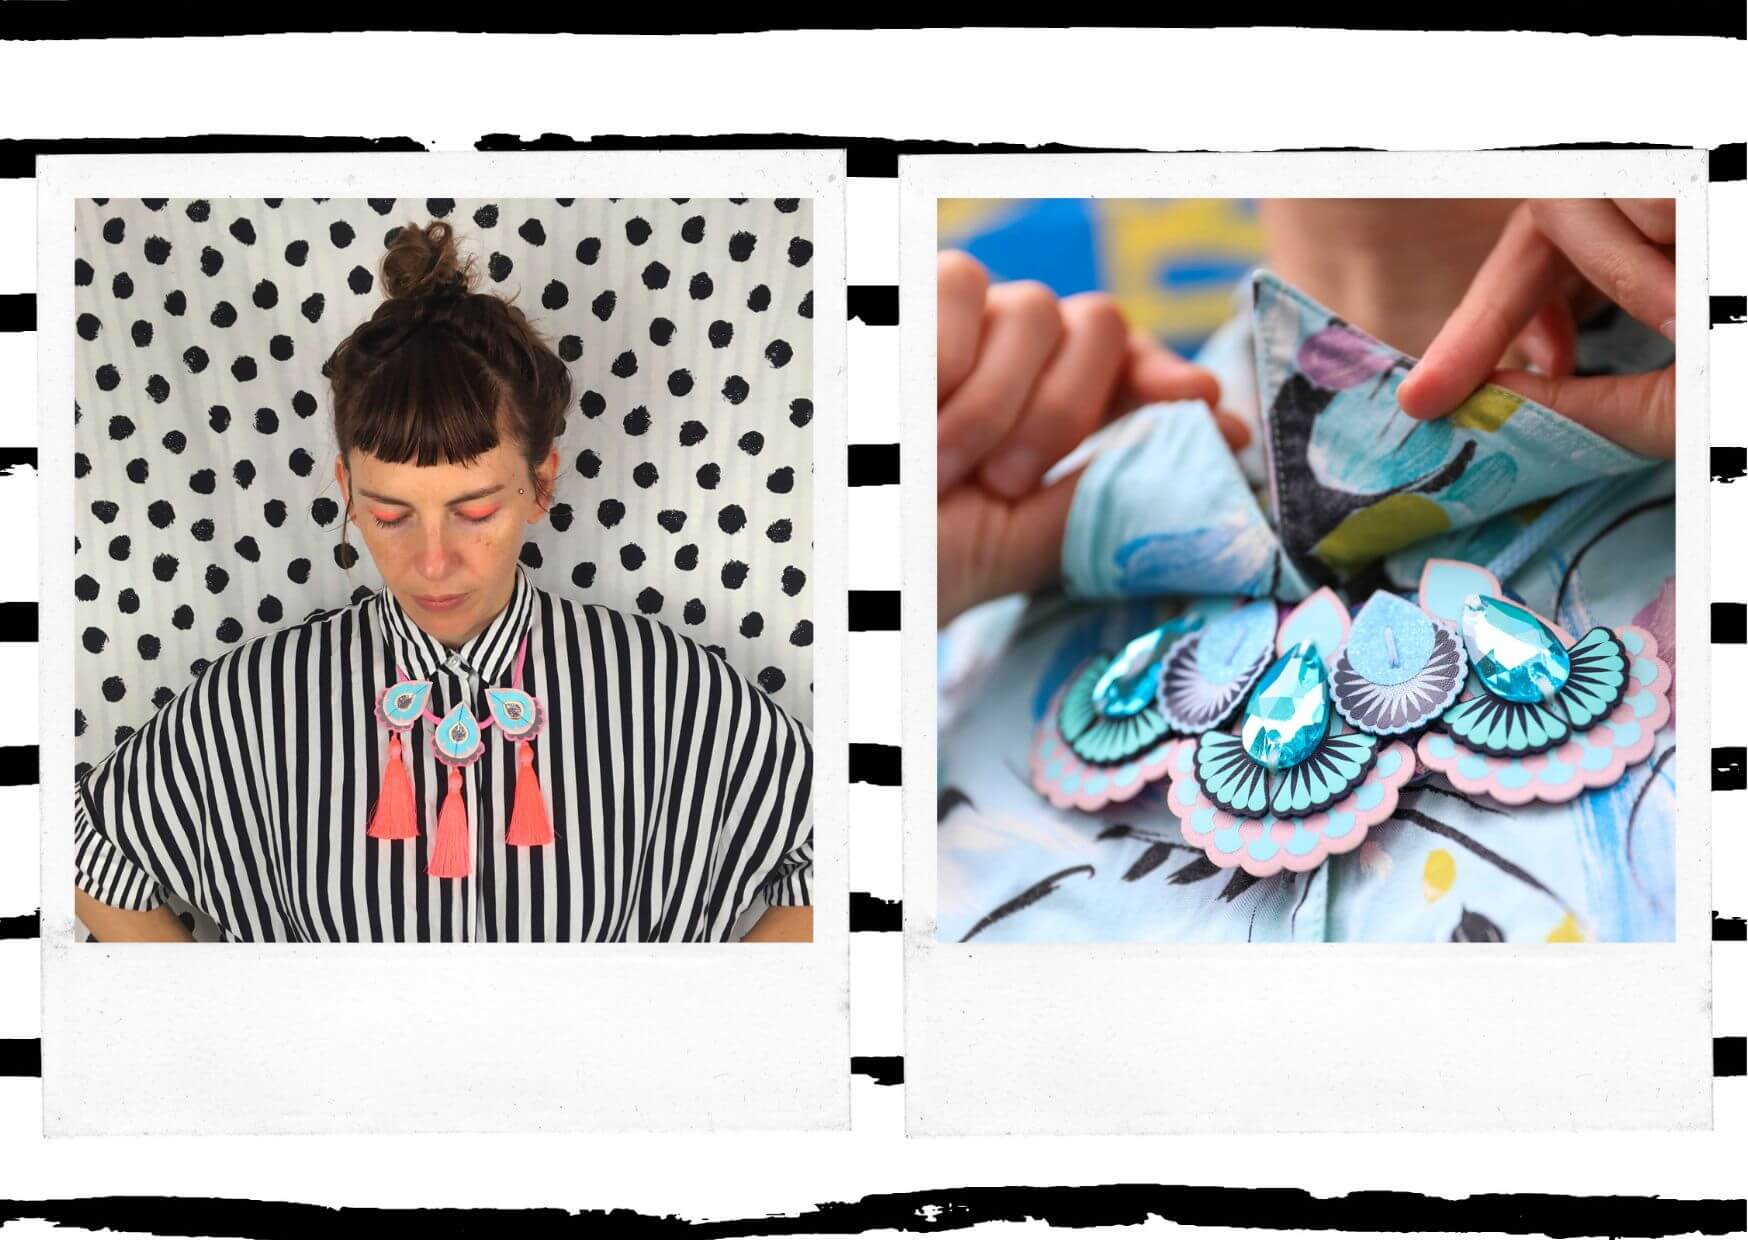 Two polaroids, side by side on a white background with black hand drawn looking stripes. on the left a woman wearing a black and white stripey shirt and bright blue and coral tassel necklace stands in front of a black and white polka dot background. On the left is a close up of a lilac and light blue jewelled bib necklace worn with a blue patterned shirt. The wearer is lifting the collar of the shirt to show off the necklace. 